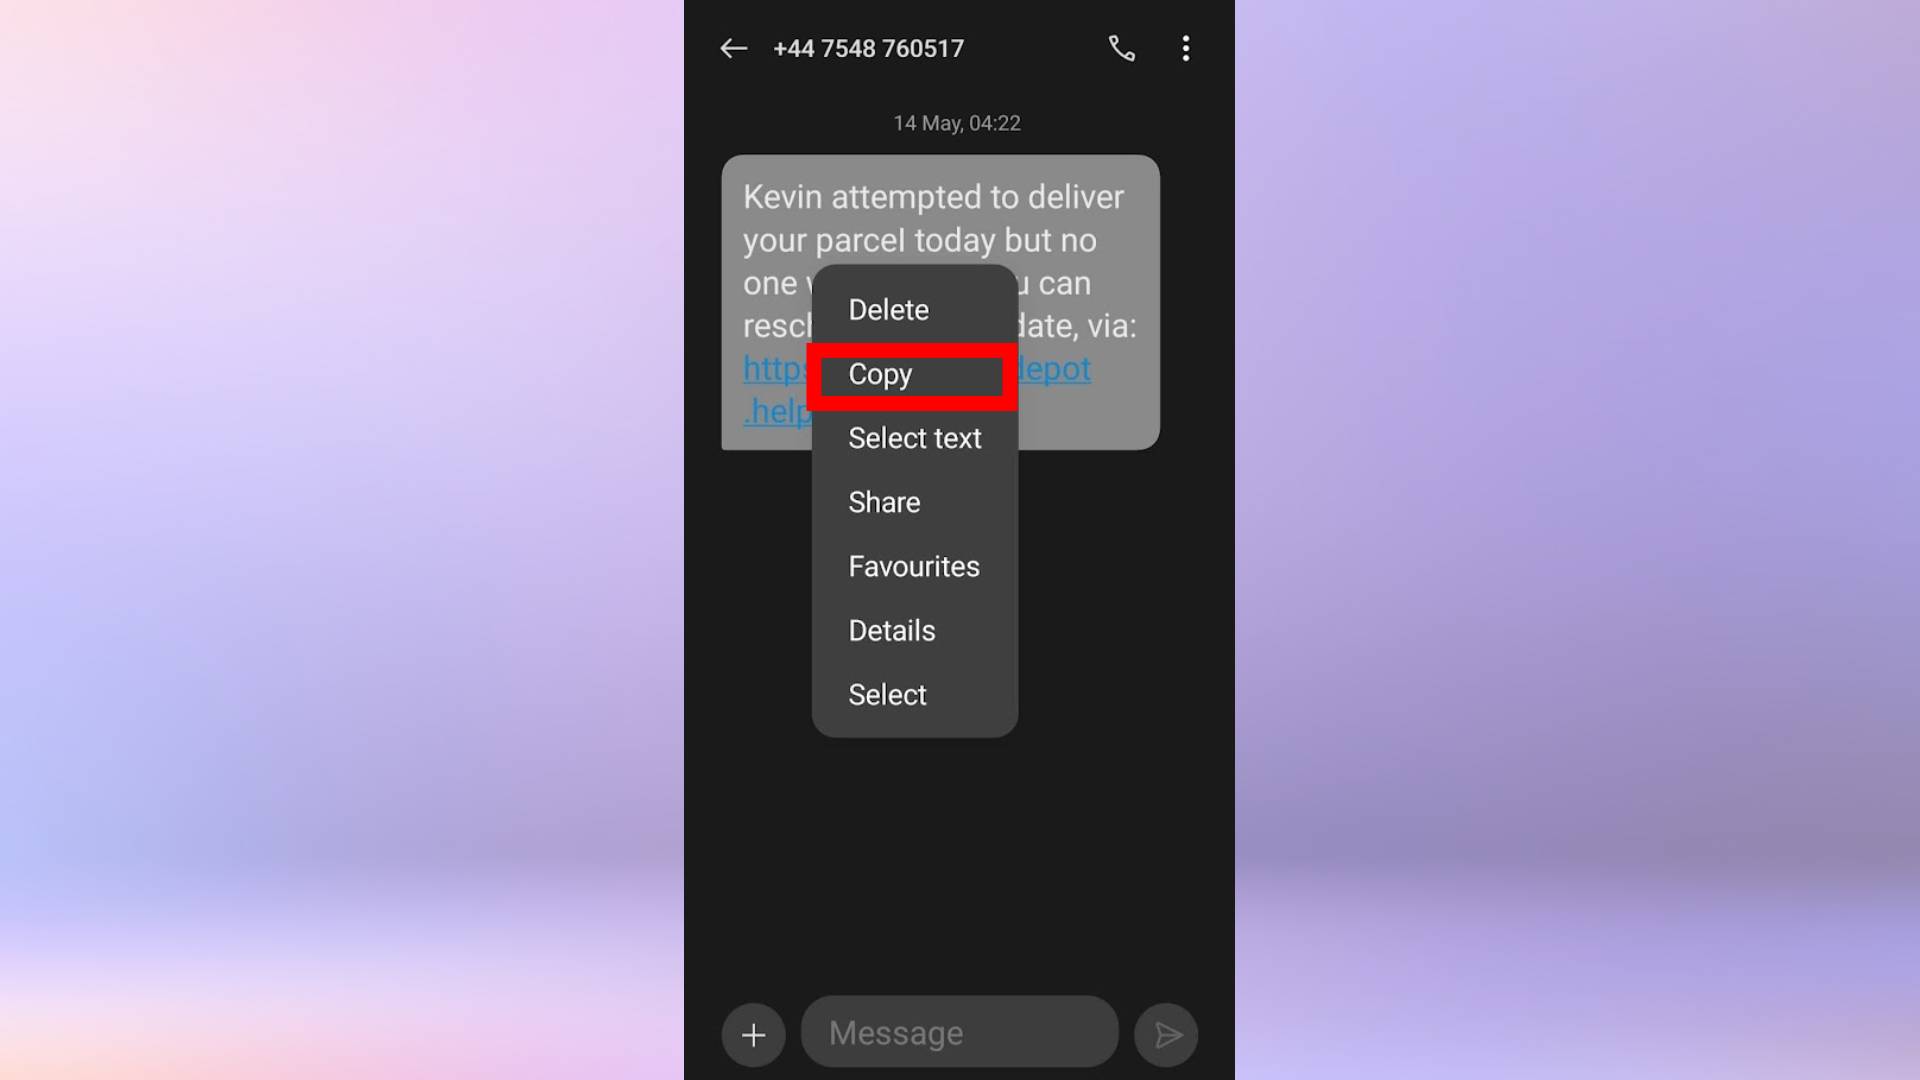 A screenshot of a spam text message on an Android phone